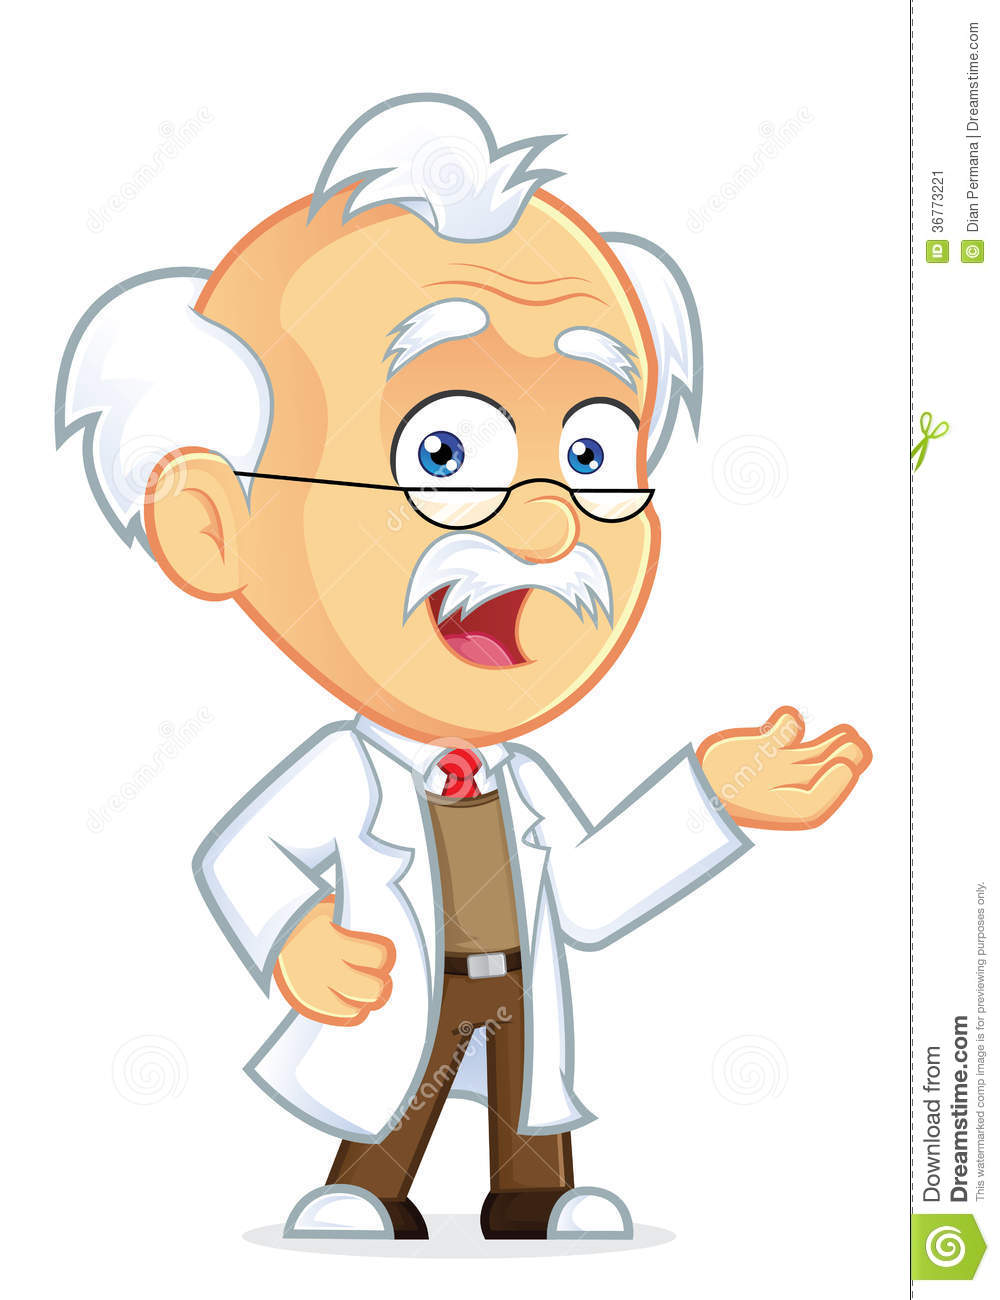 Clipart Picture Of A Professor Cartoon Character In Welcoming Gesture